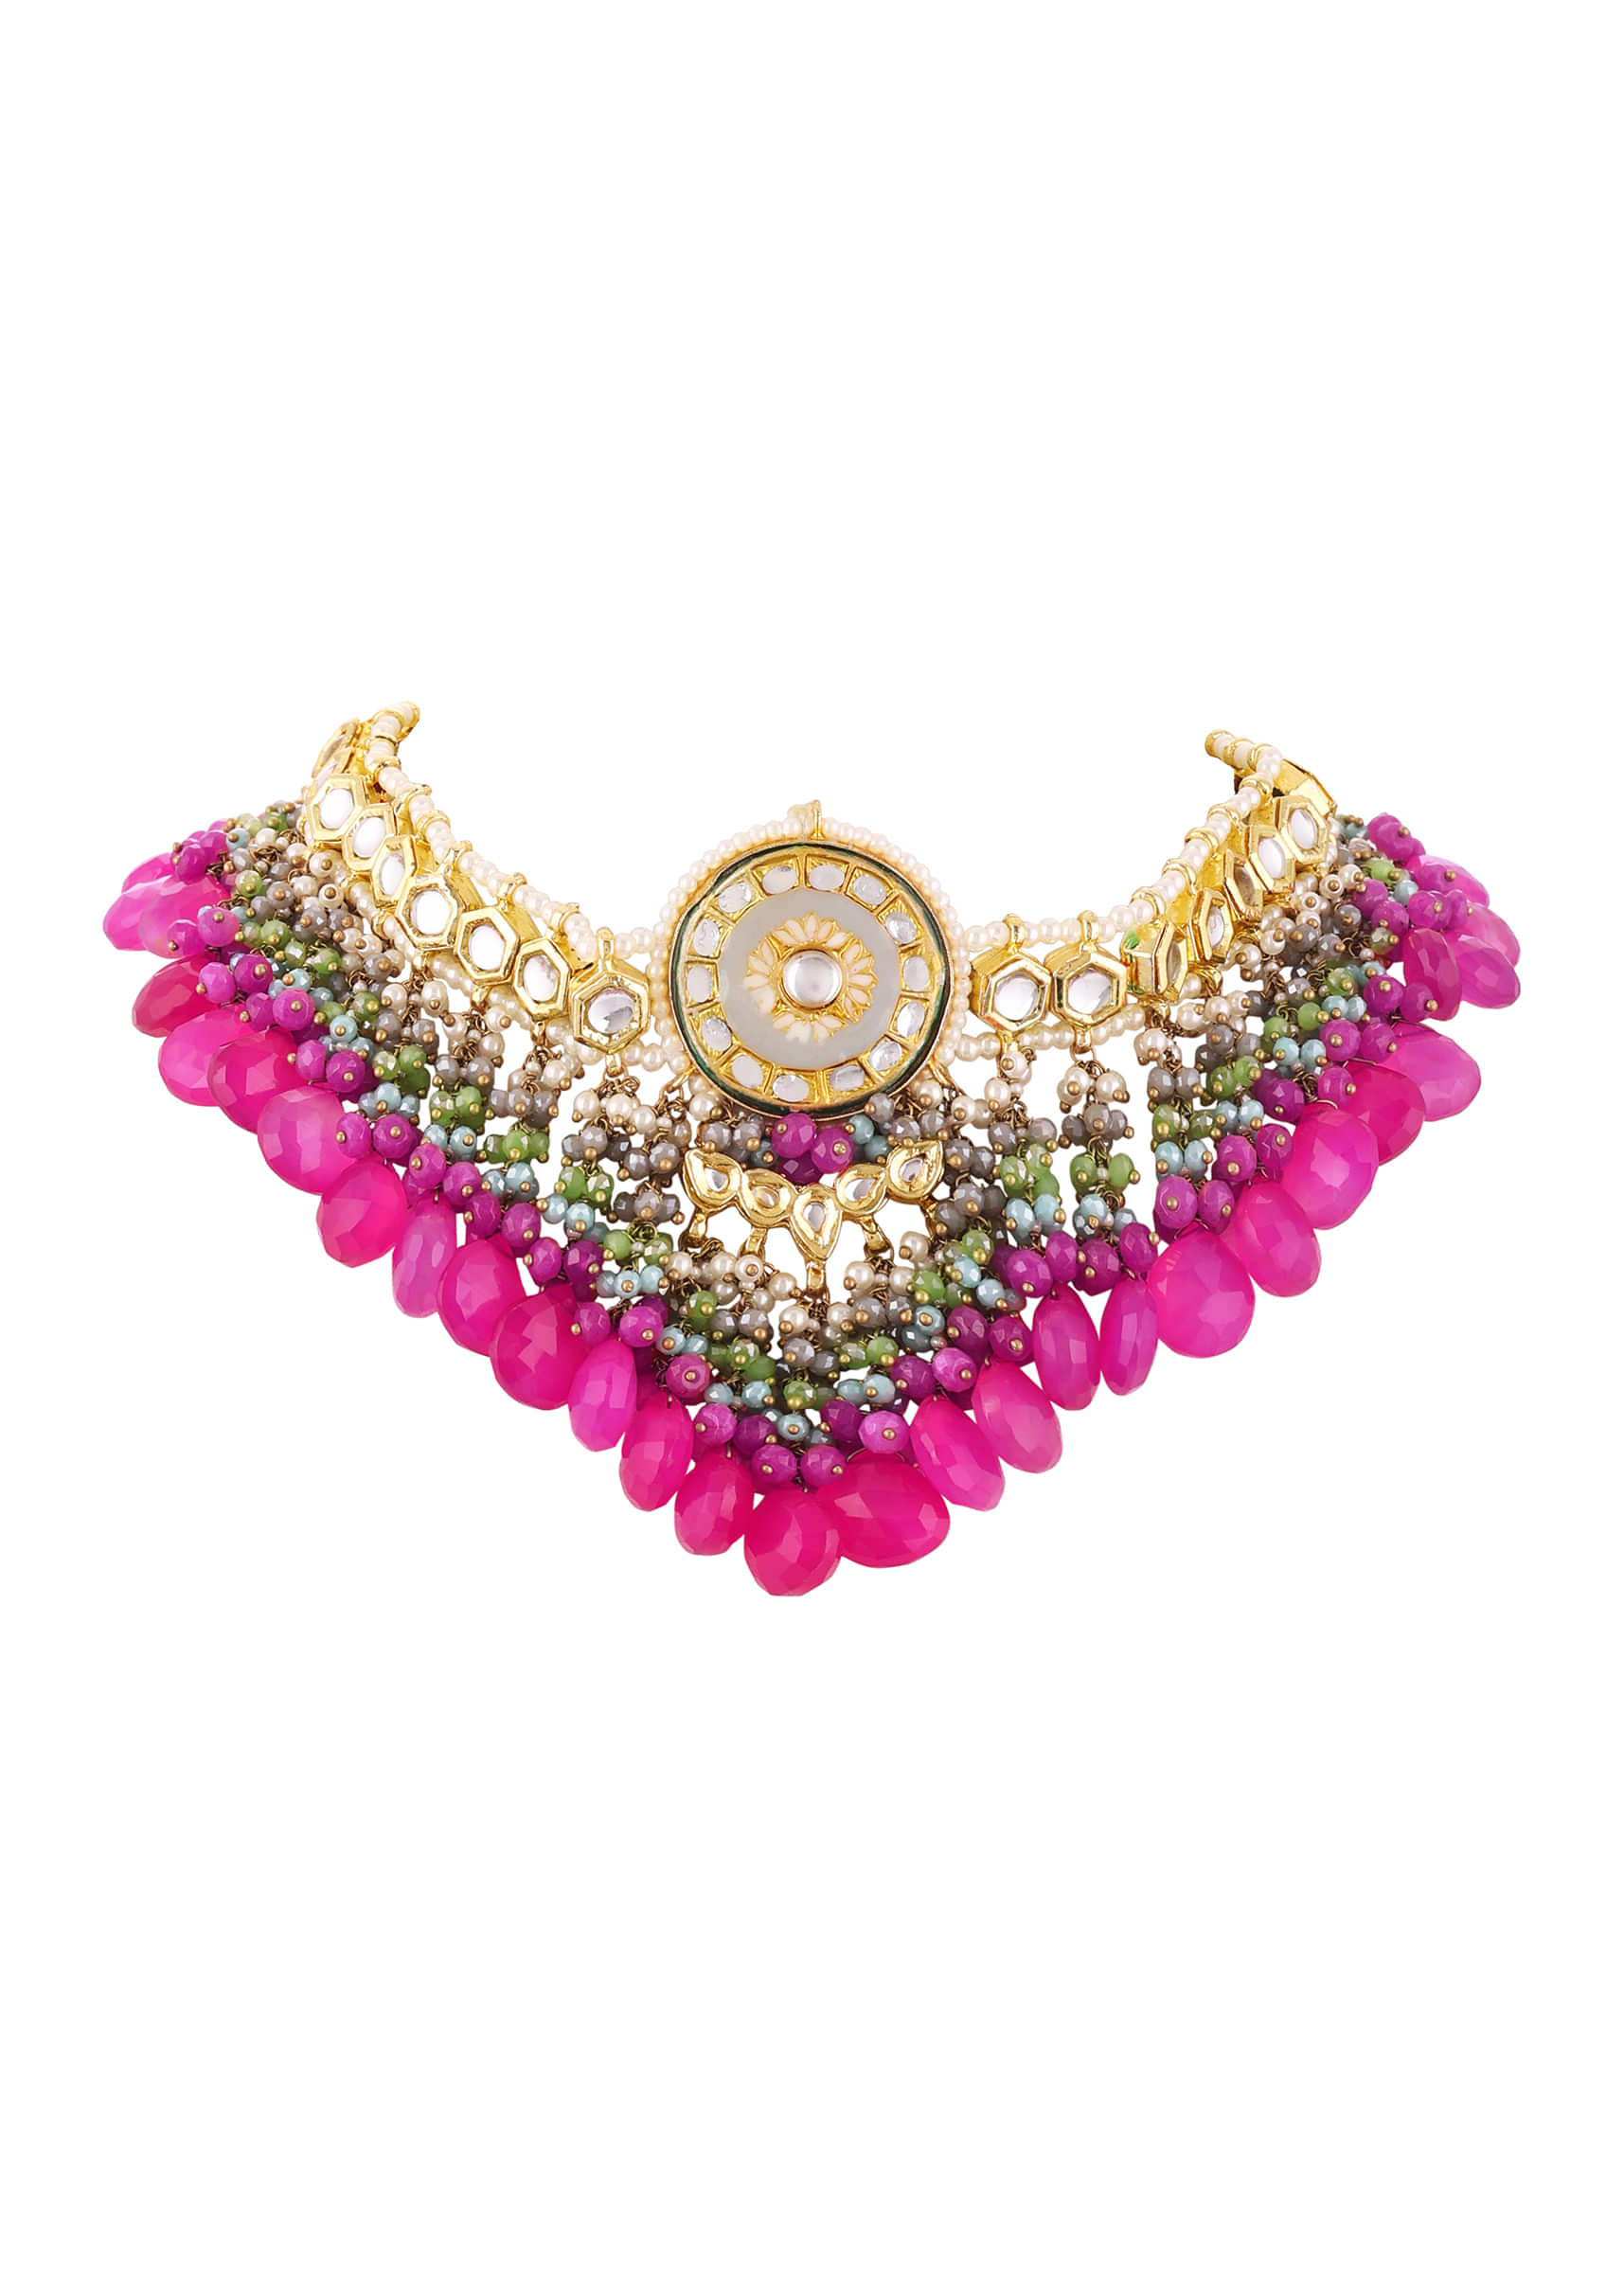 Gold Plated Kundan Necklace With Grey Floral Minakari Centre, Pink Stone Drops And Bead Fringes